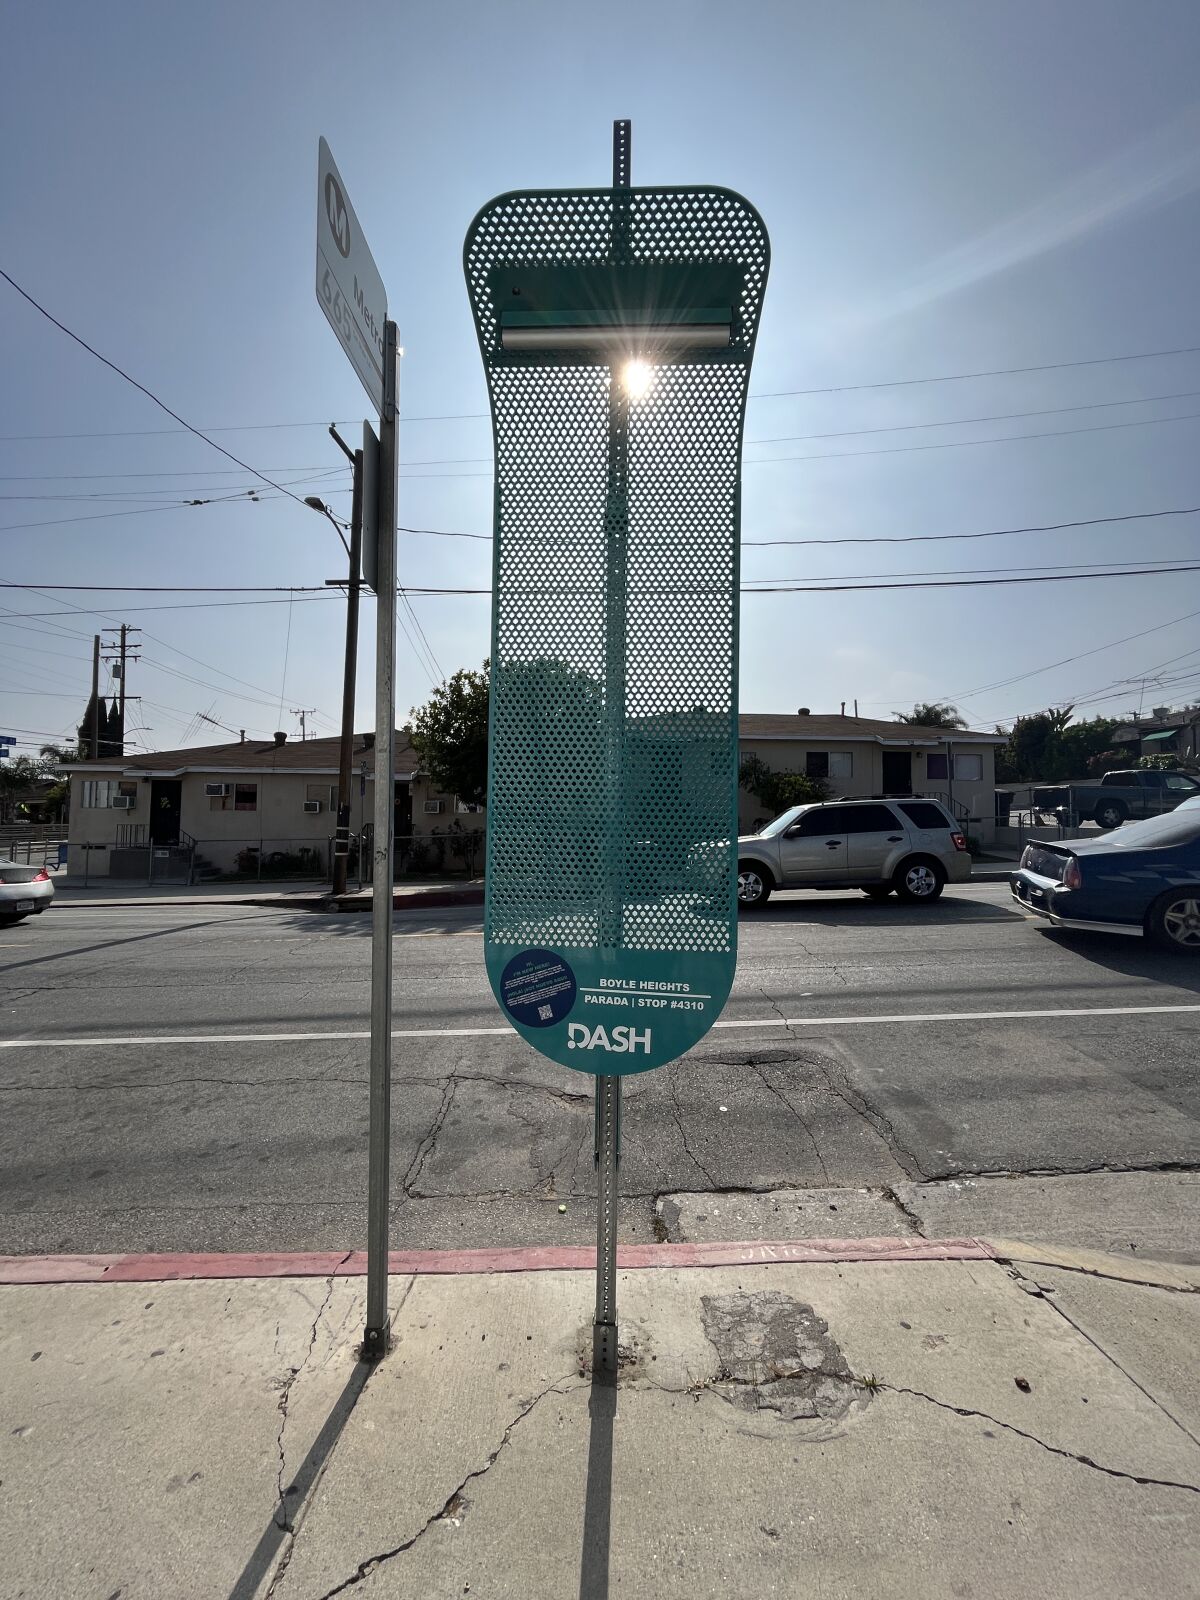 A piece of perforated metal attached to a street pole blocks the sun from view on a sunny Los Angeles street